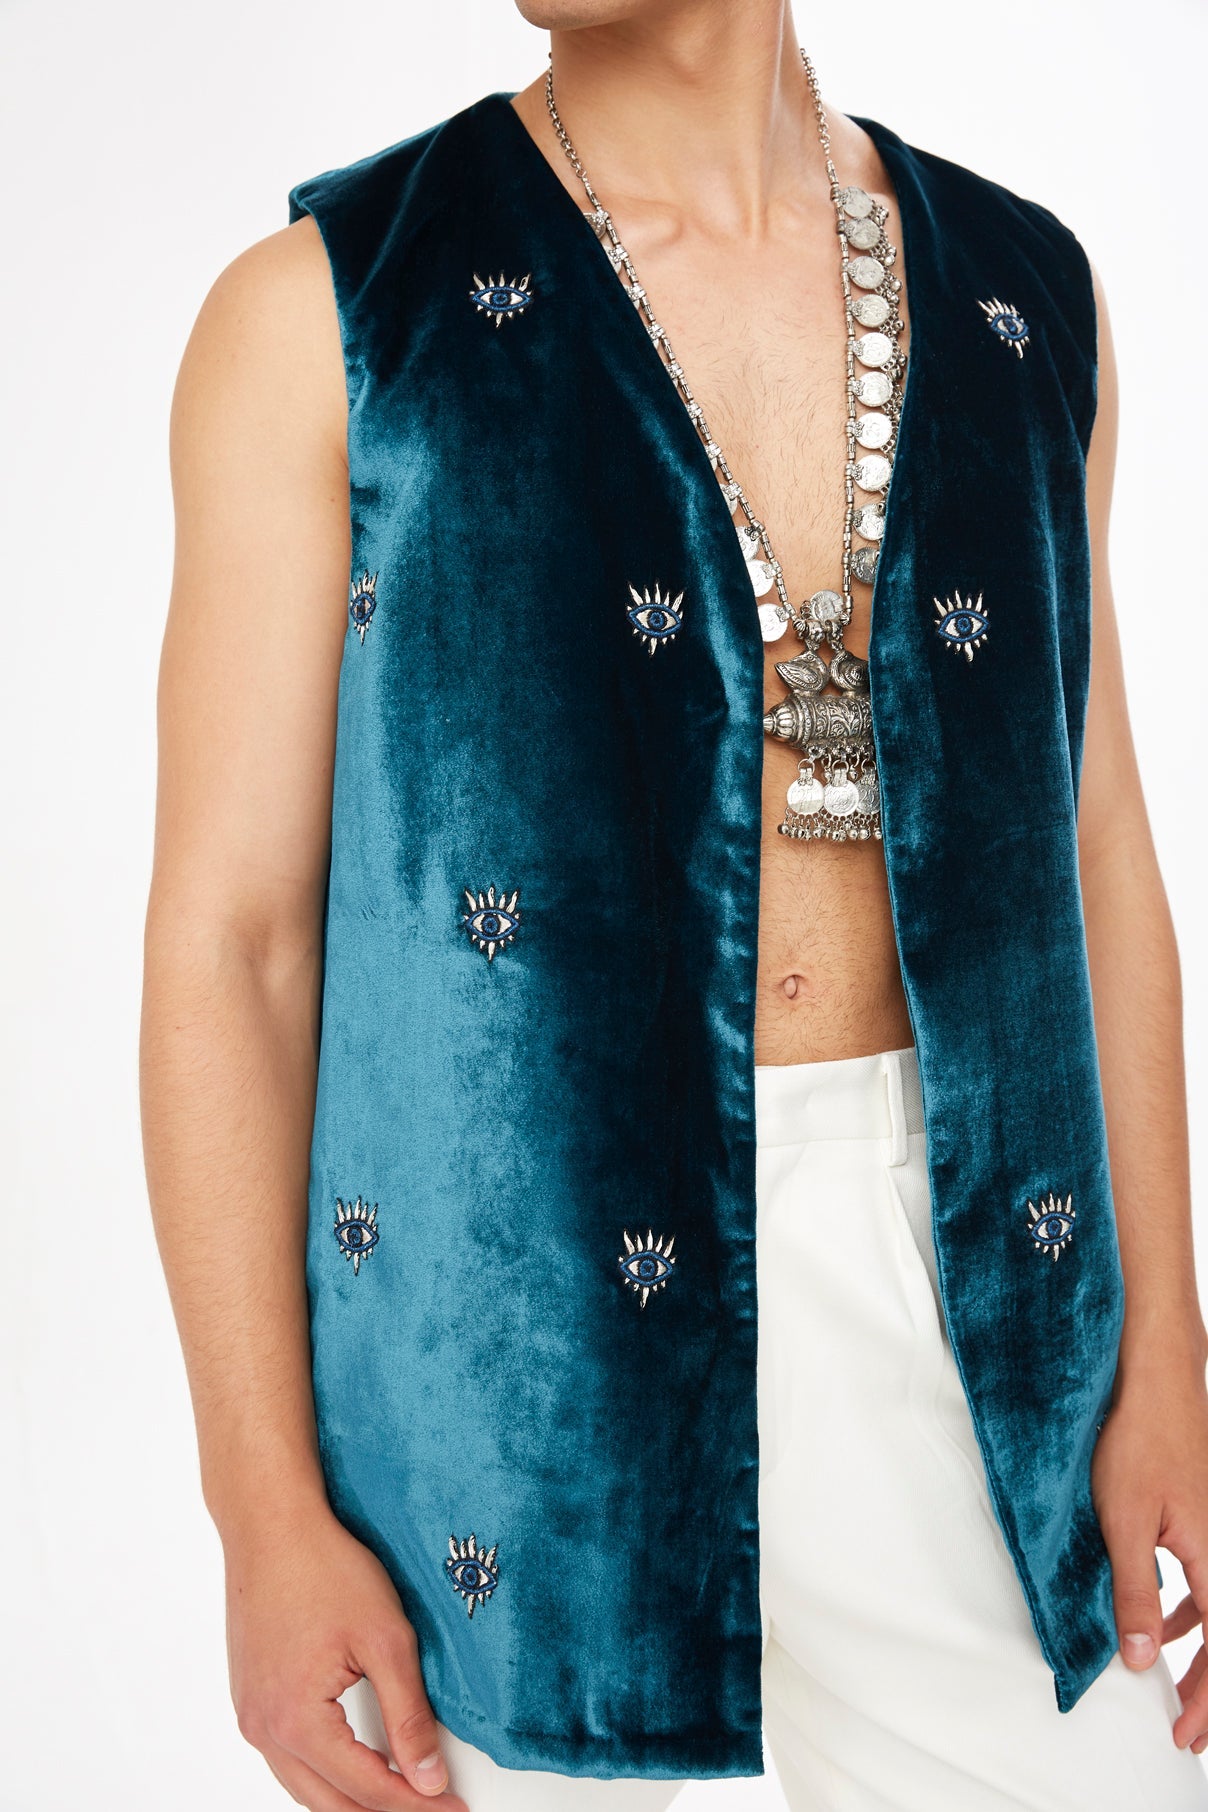 The 'All Eyes on You' Vest